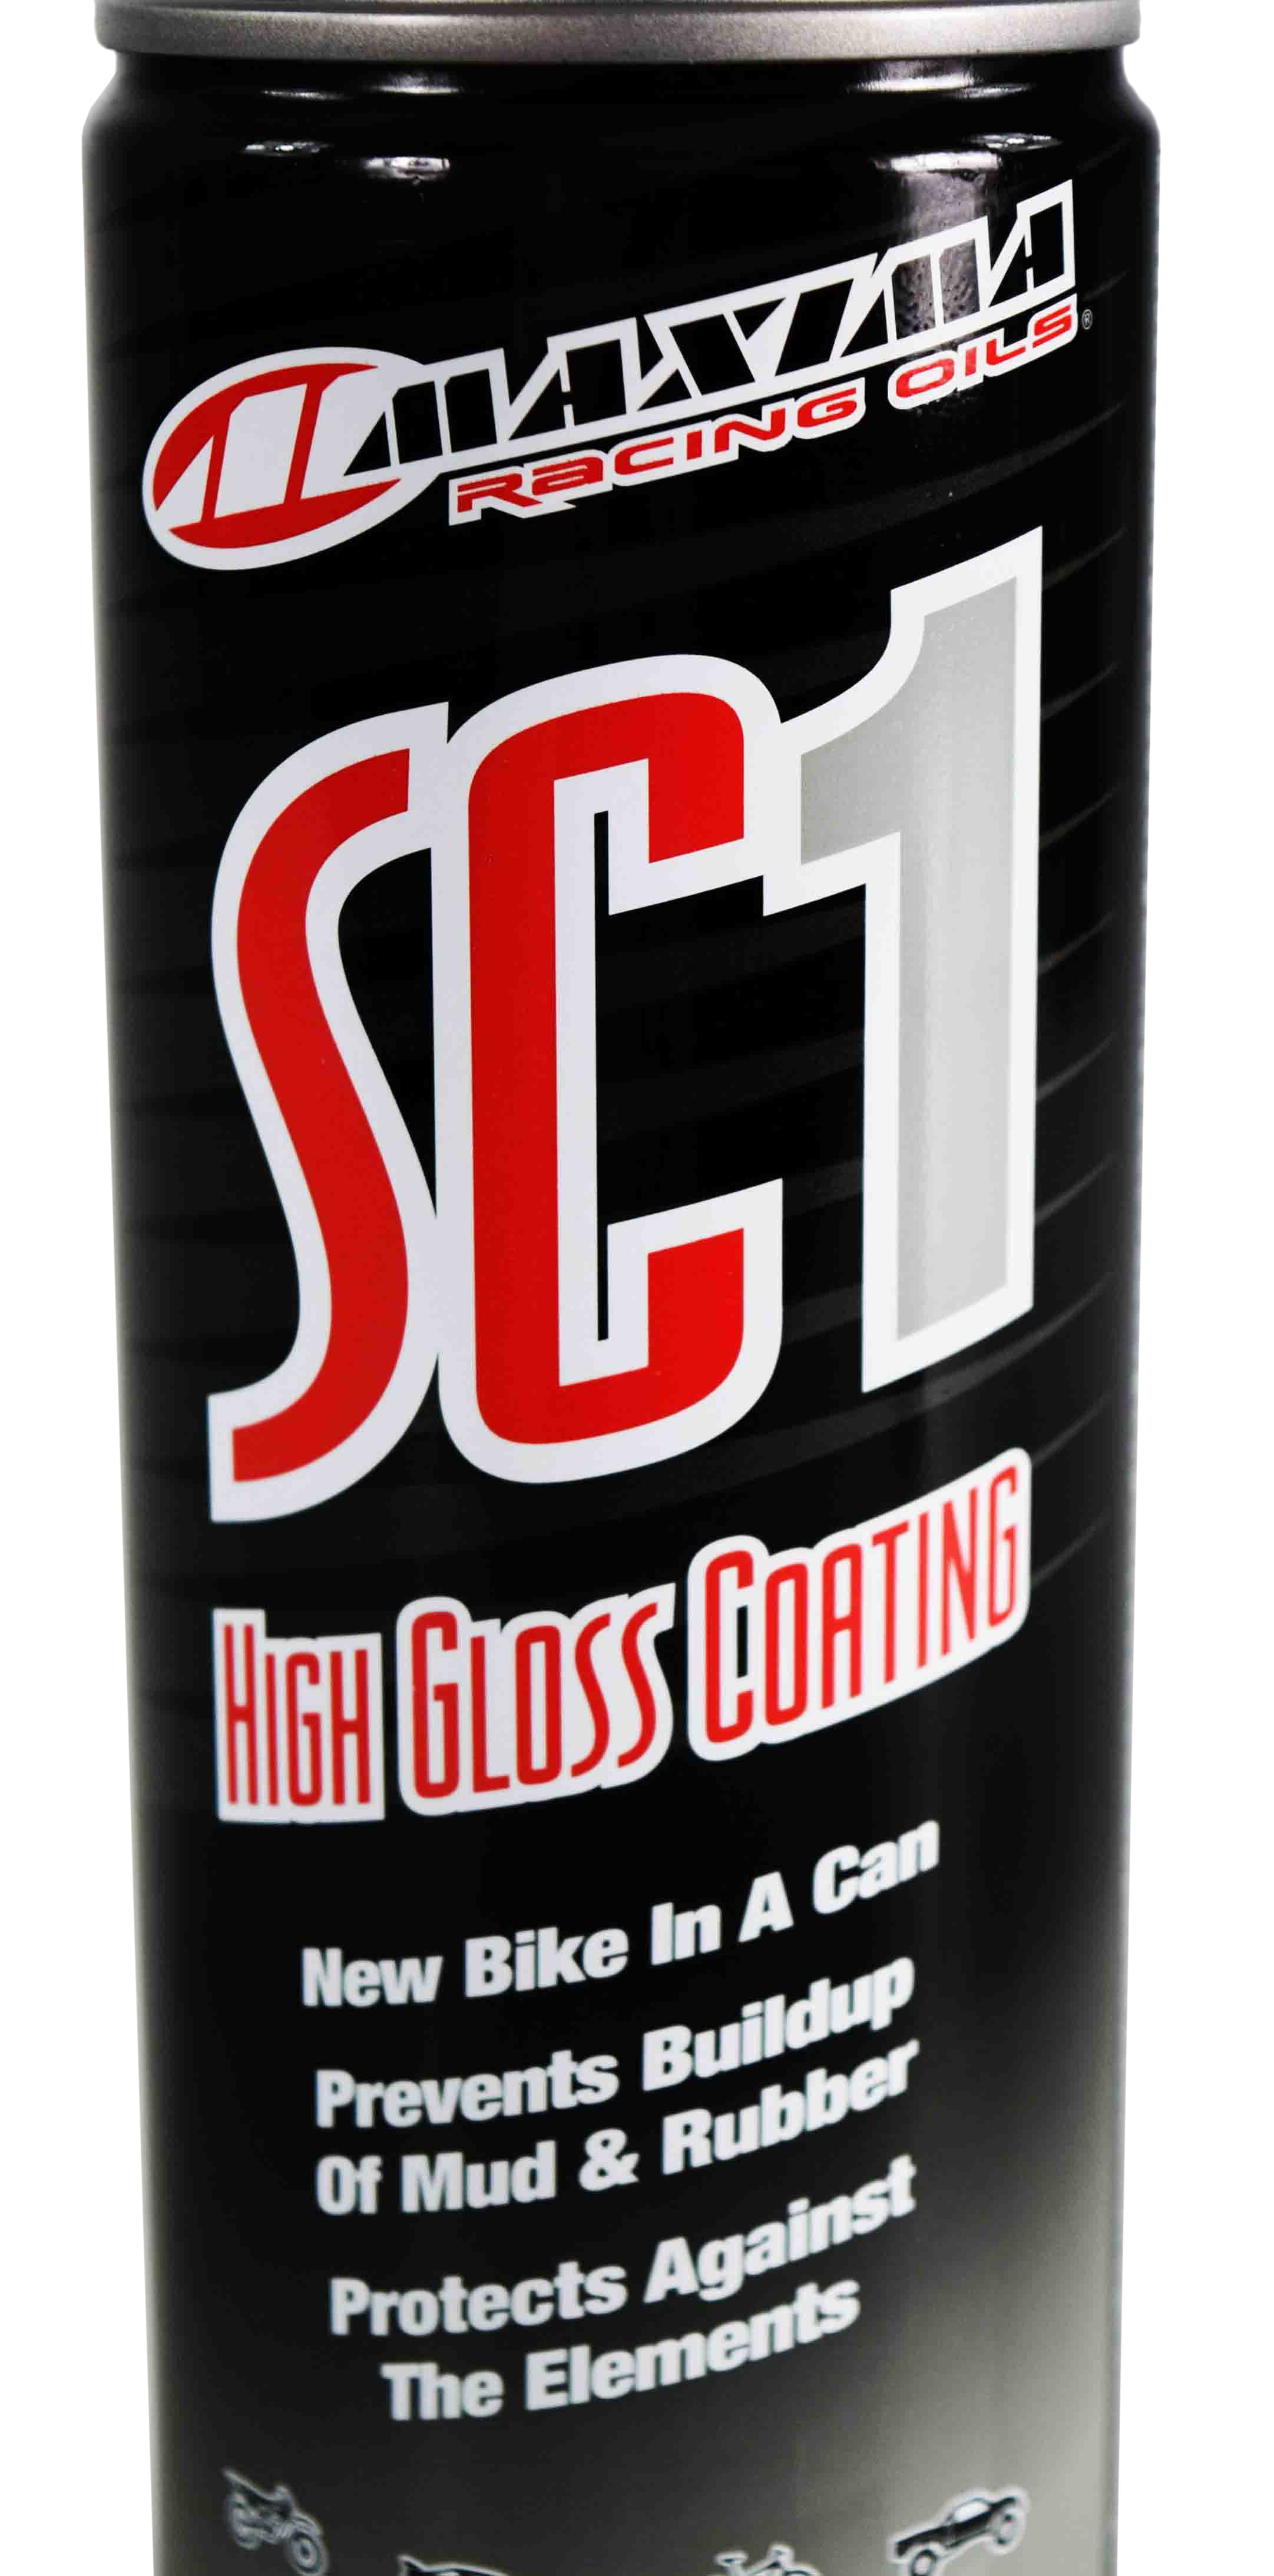 MAXIMA RACING OILS SC1 HIGH GLOSS SILICONE CLEAR COAT 12OZ. : Cool